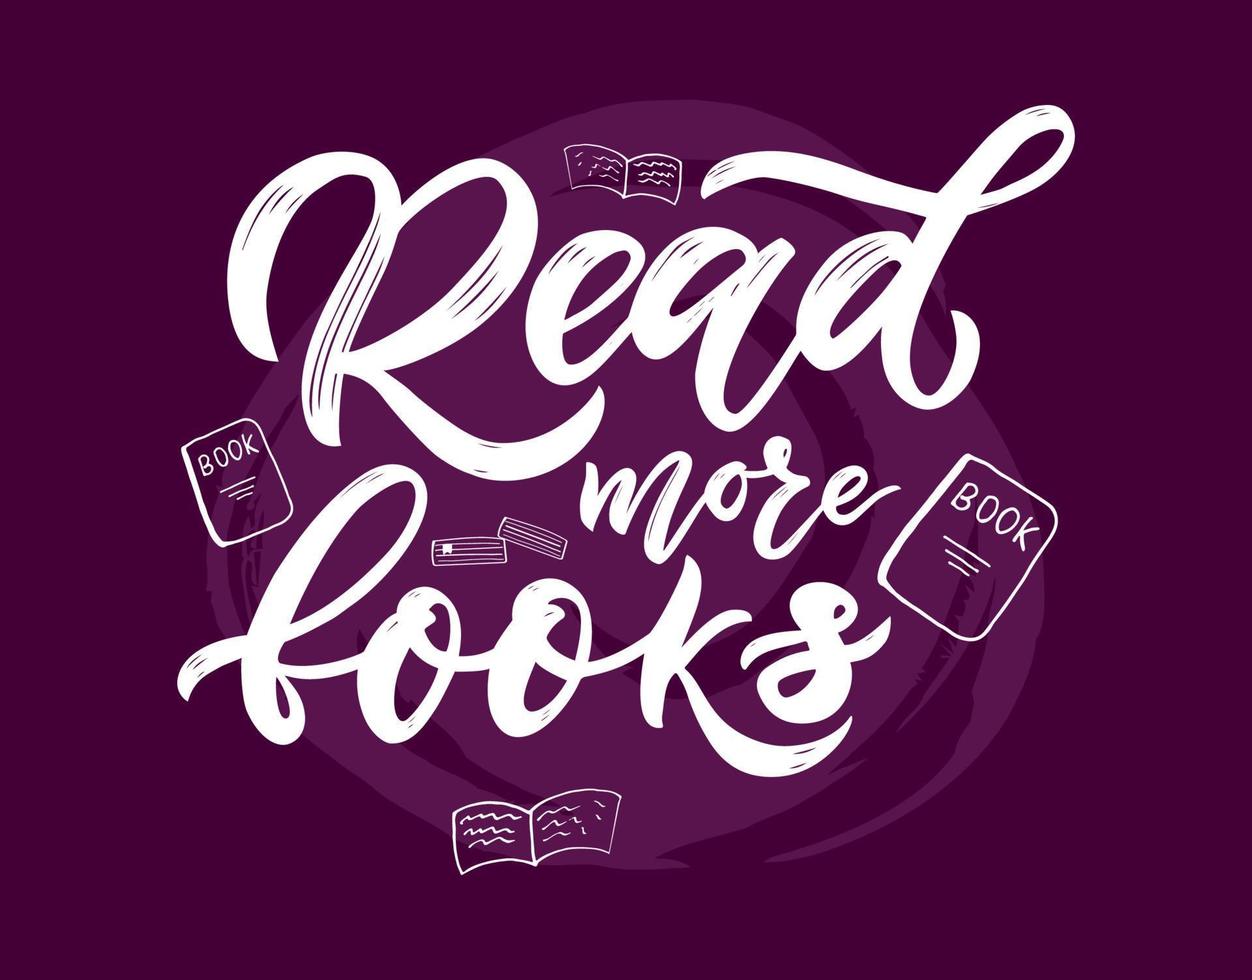 Read more books hand lettering motivational quote. Texture Script. Drawn white books on violet background. Vector illustration. Card, flyer, bookmark, web banner, poster of library. Education concept.